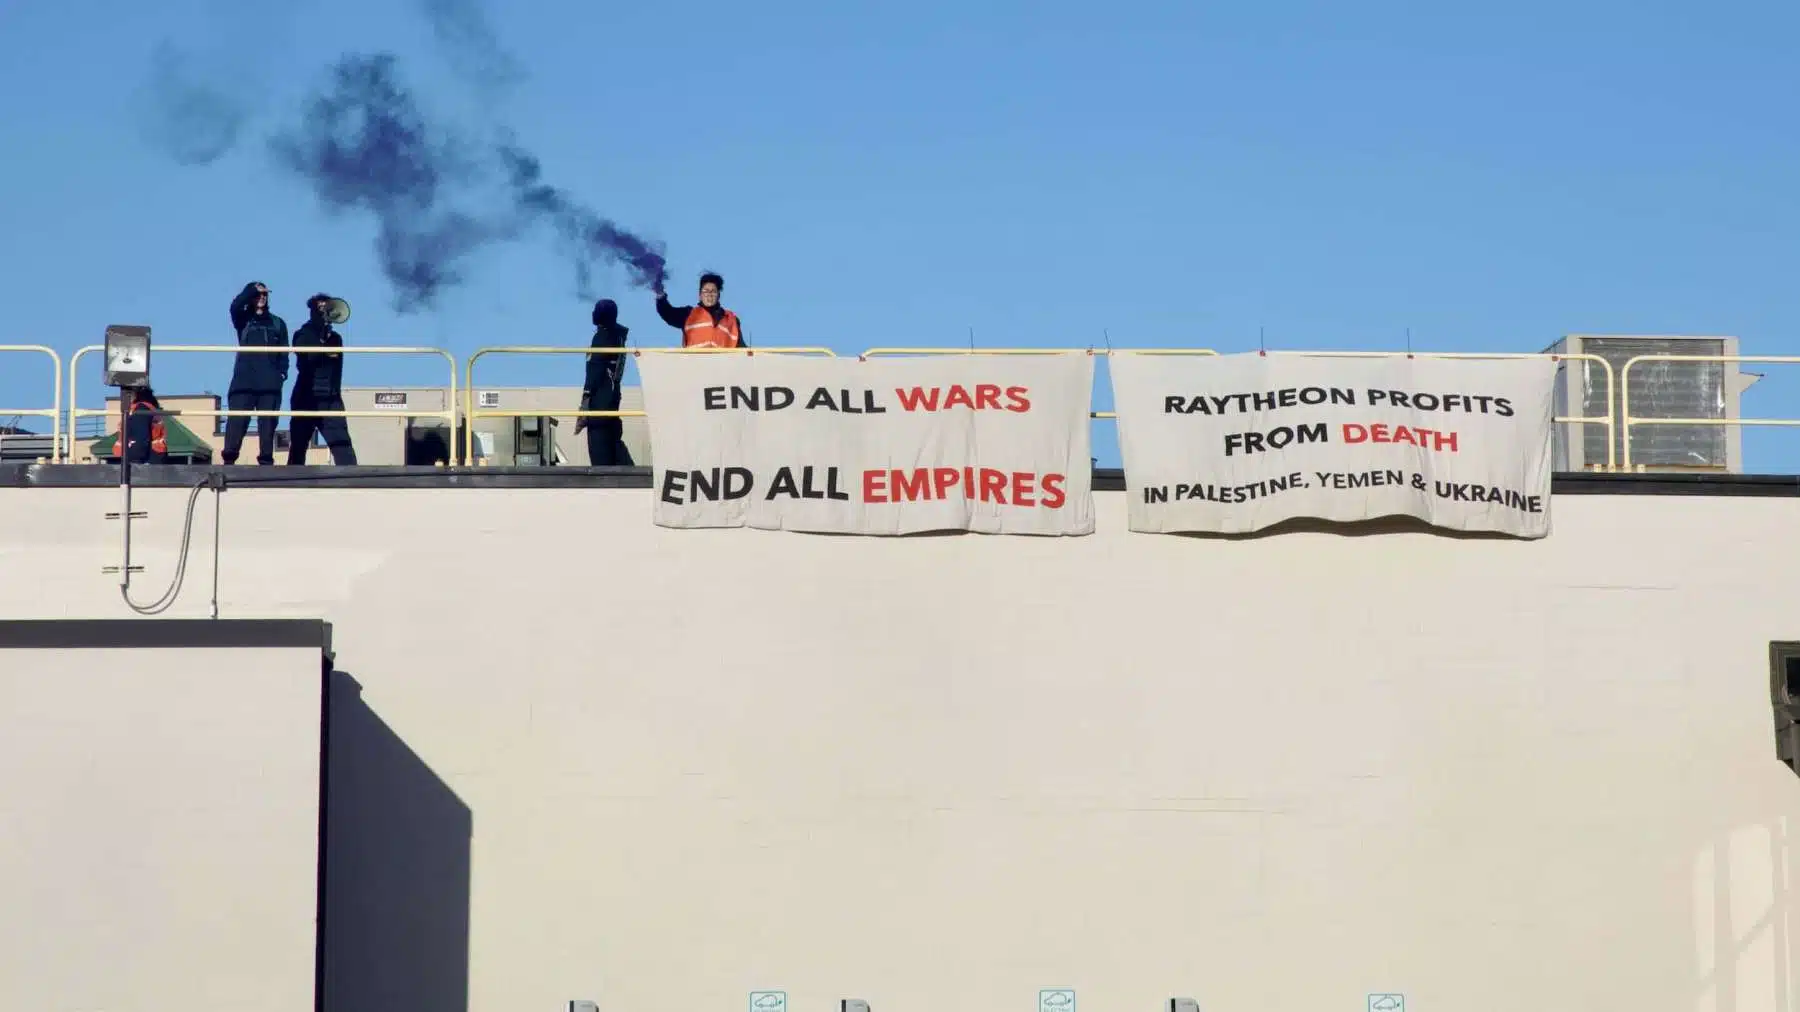 Activists climb onto the roof of Raytheon’s Cambridge facility in protest of war profiteering, killing of civilians